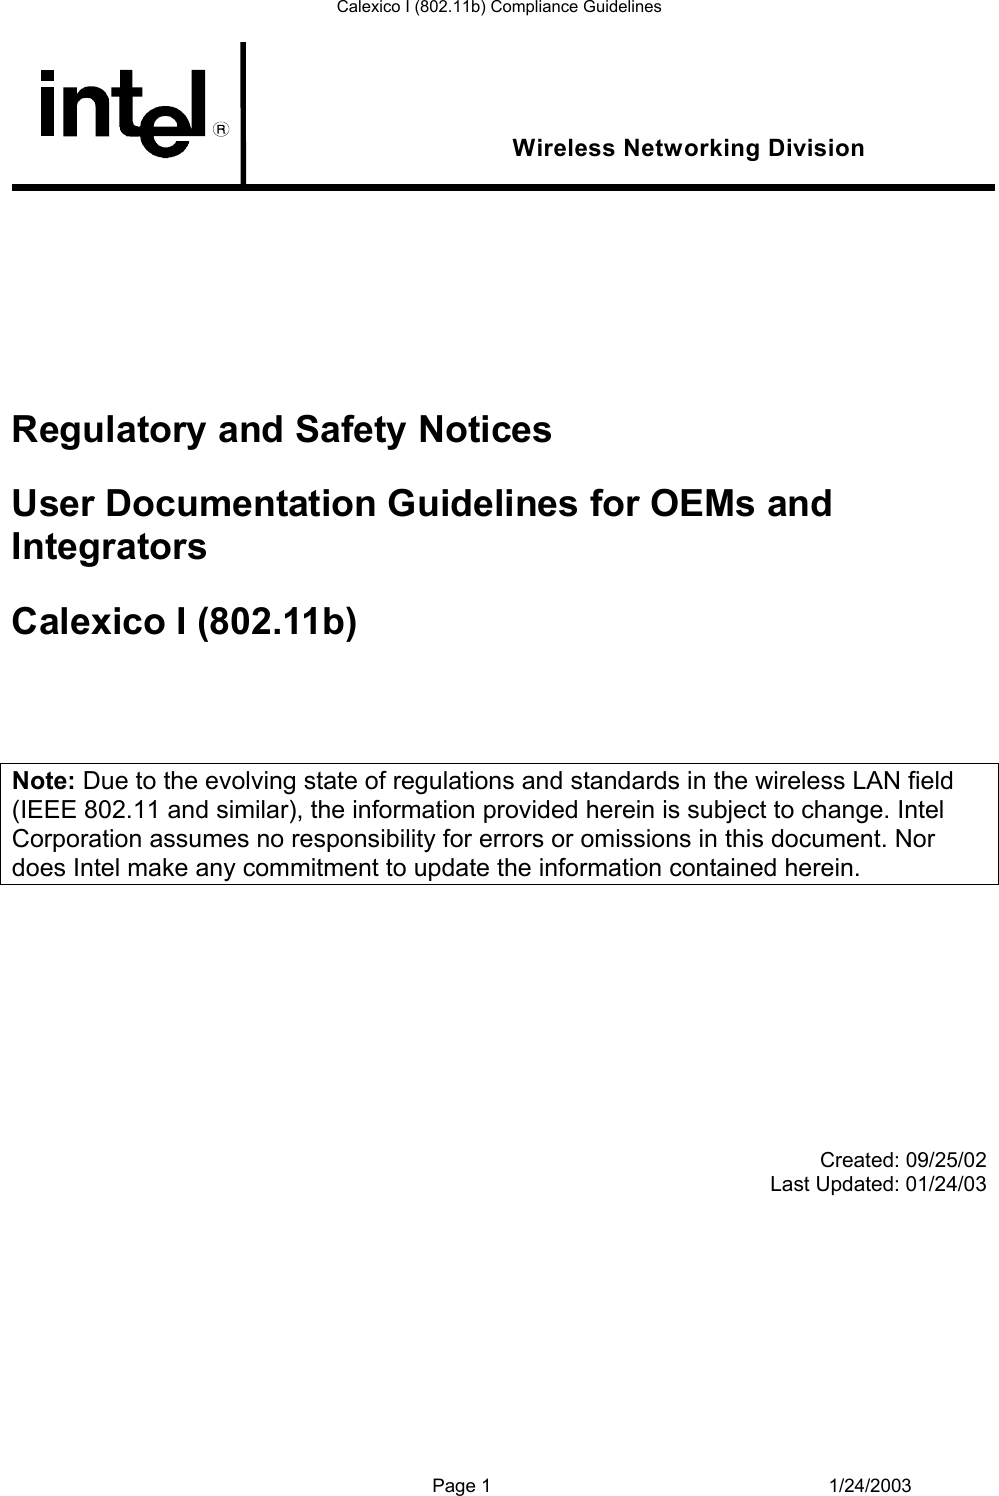 Calexico I (802.11b) Compliance Guidelines  Wireless Networking Division         Regulatory and Safety Notices User Documentation Guidelines for OEMs and Integrators Calexico I (802.11b)    Note: Due to the evolving state of regulations and standards in the wireless LAN field (IEEE 802.11 and similar), the information provided herein is subject to change. Intel Corporation assumes no responsibility for errors or omissions in this document. Nor does Intel make any commitment to update the information contained herein.             Created: 09/25/02 Last Updated: 01/24/03            Page 1 1/24/2003 